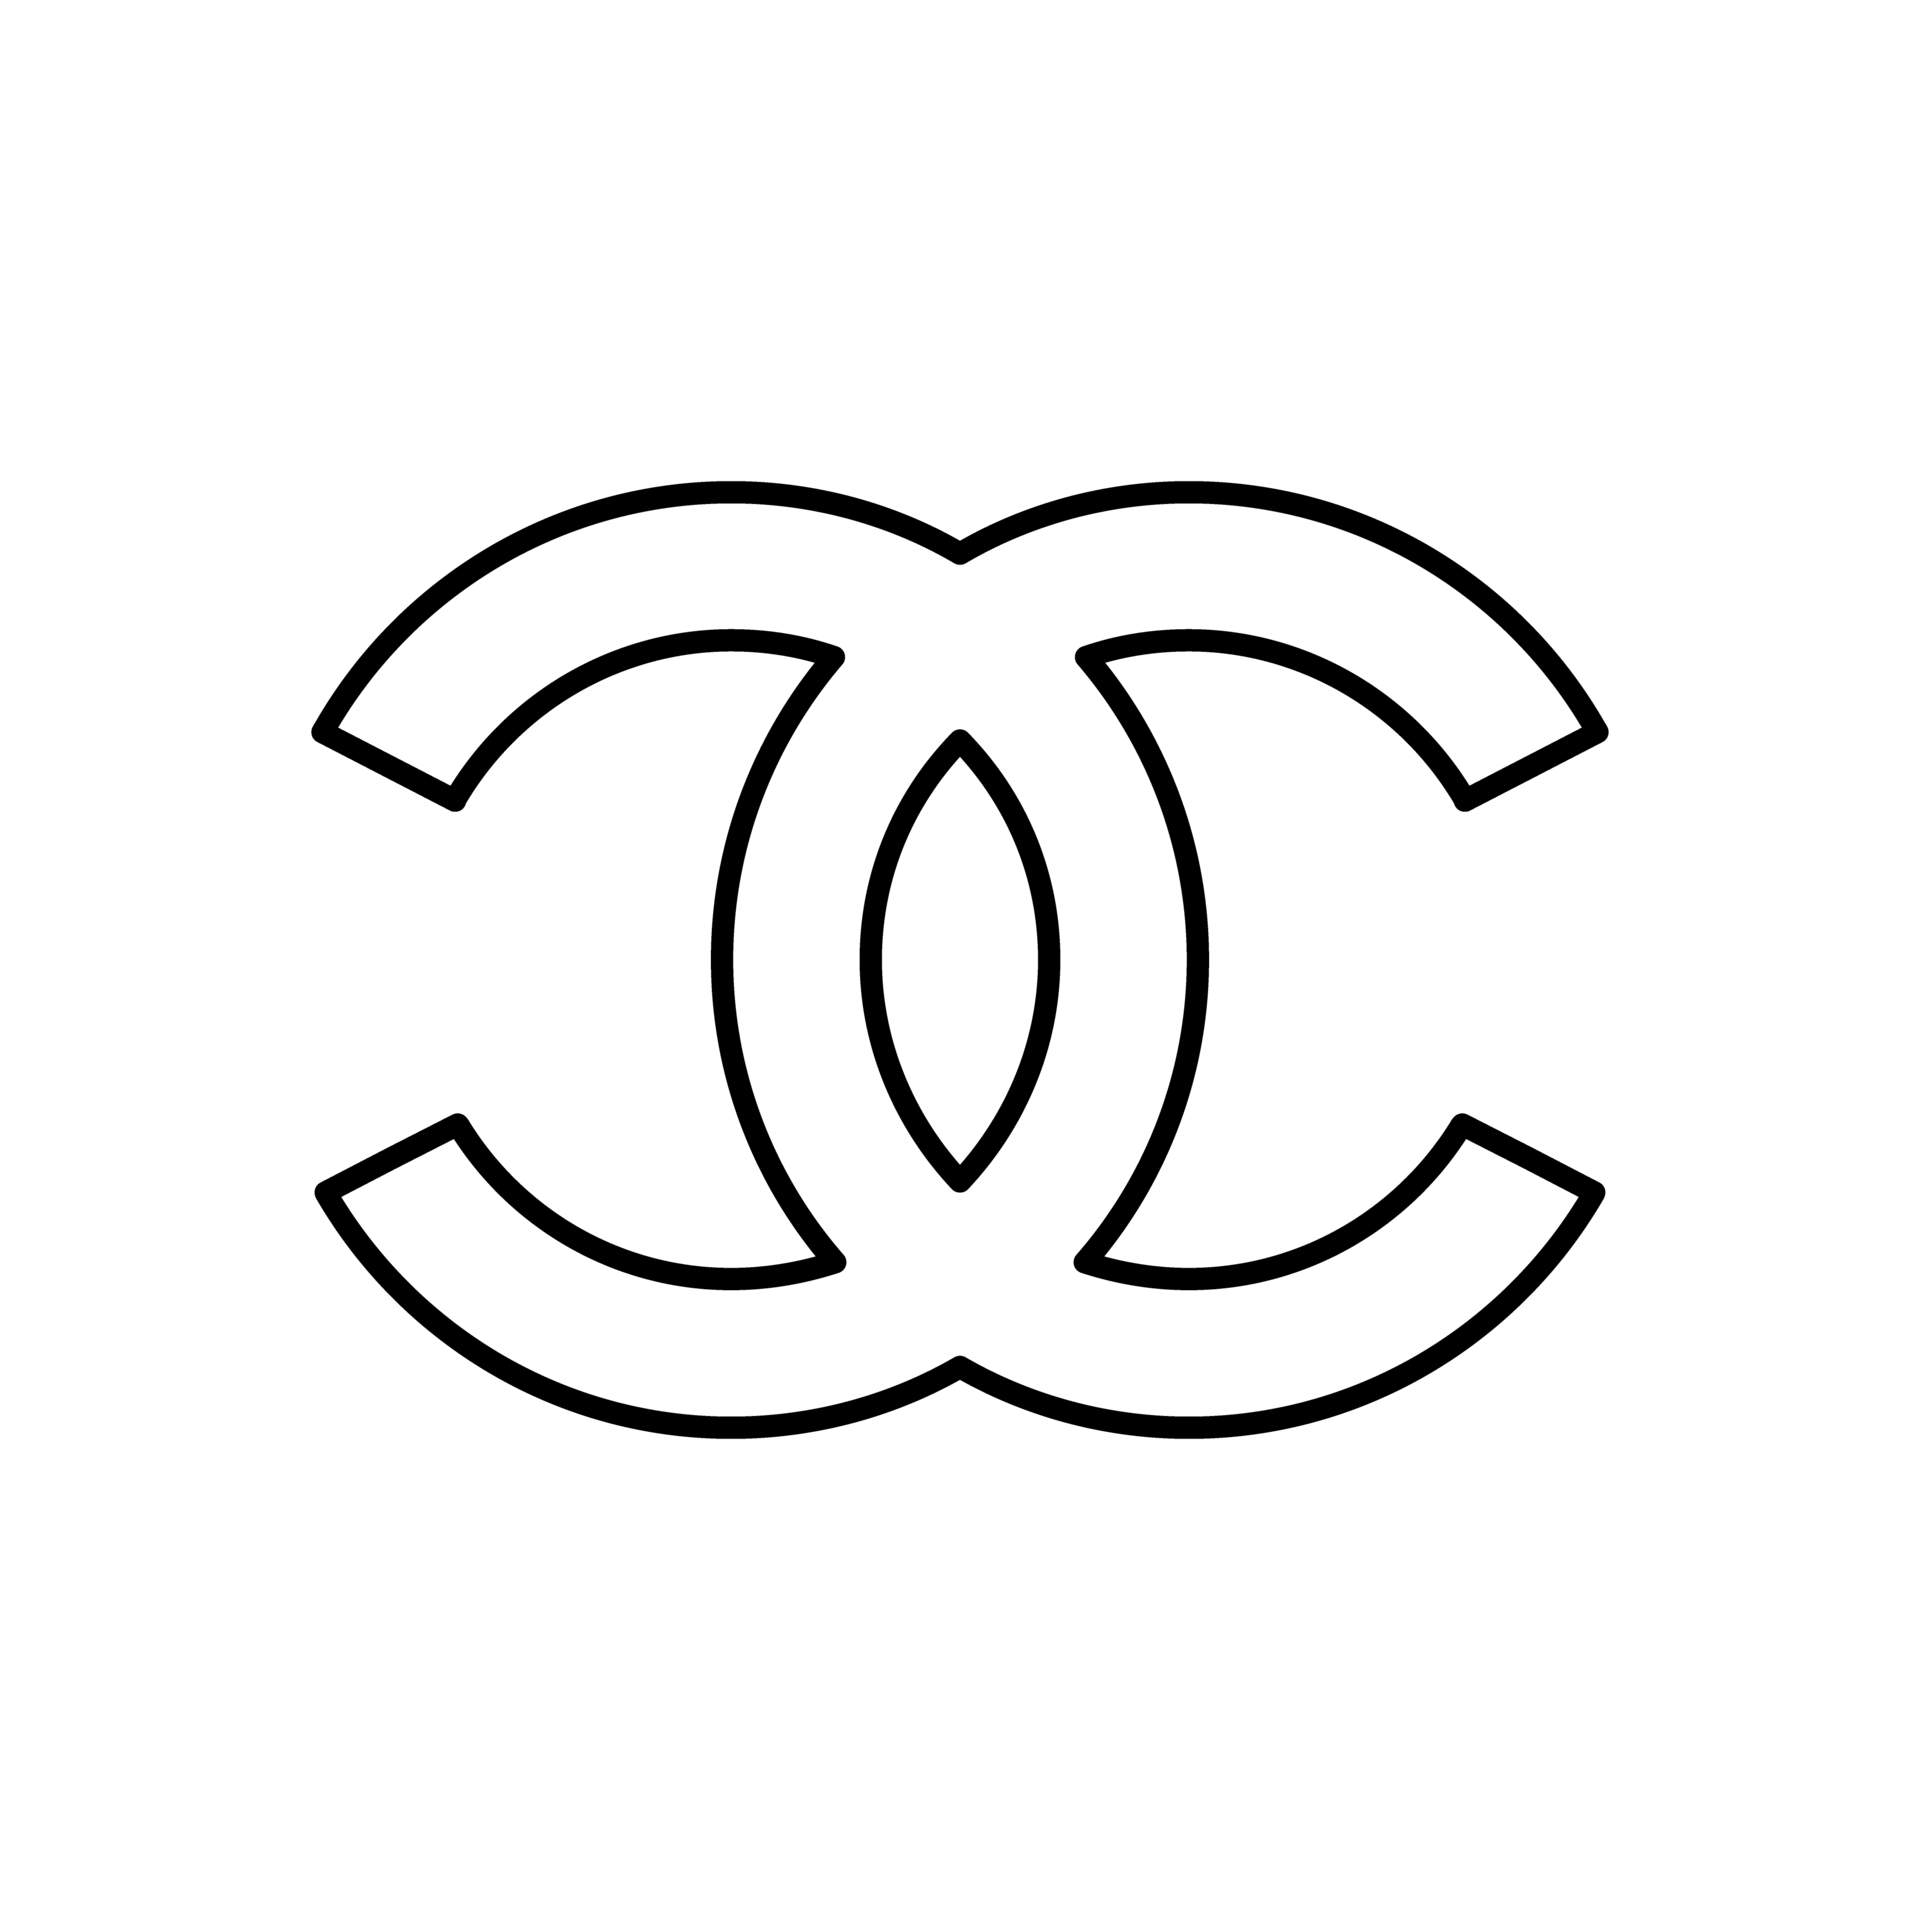 chanel logo png, chanel icon transparent png 27127427 PNG